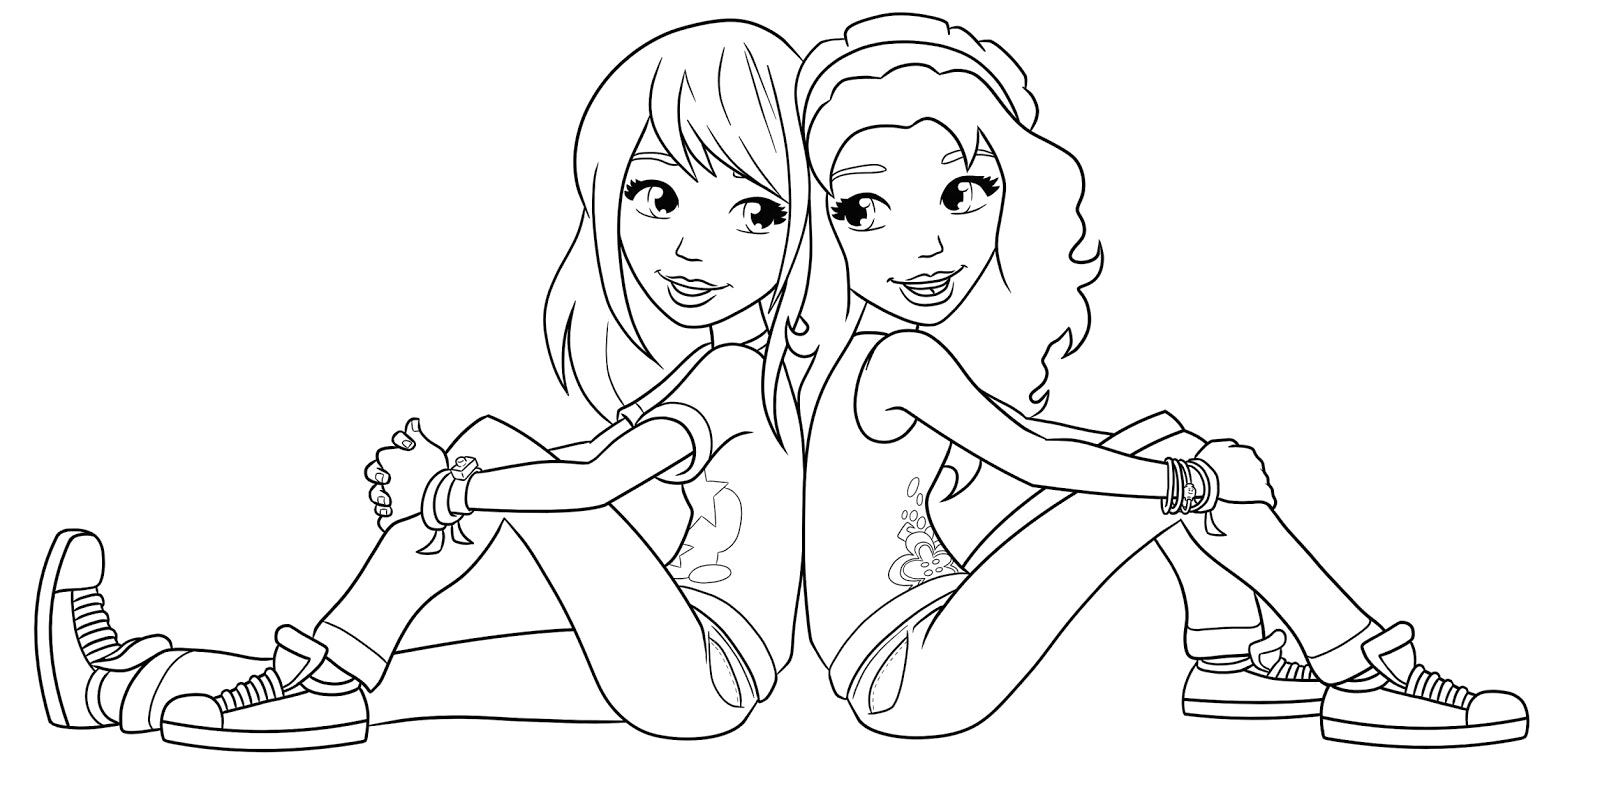 bff-coloring-pages-black-and-white-free-printable-coloring-pages